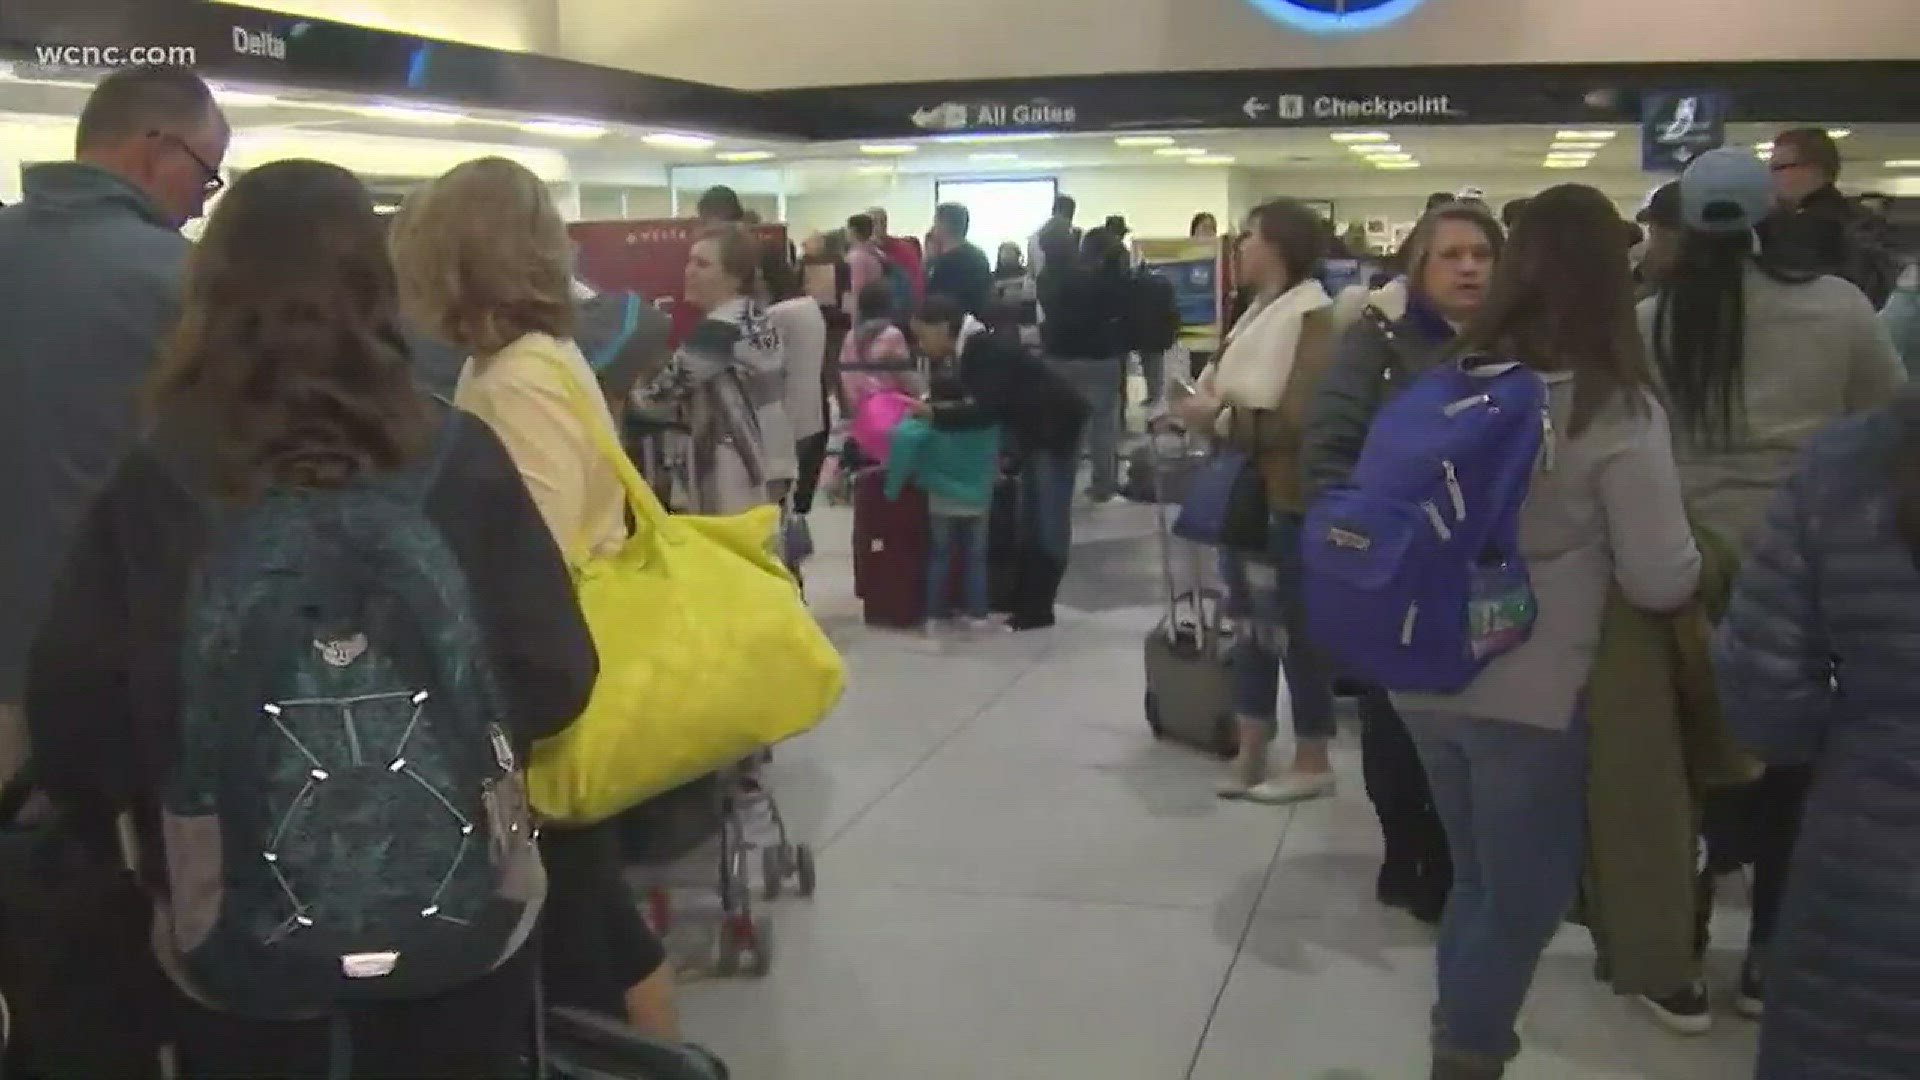 128,000 travelers are expected at Charlotte Douglas